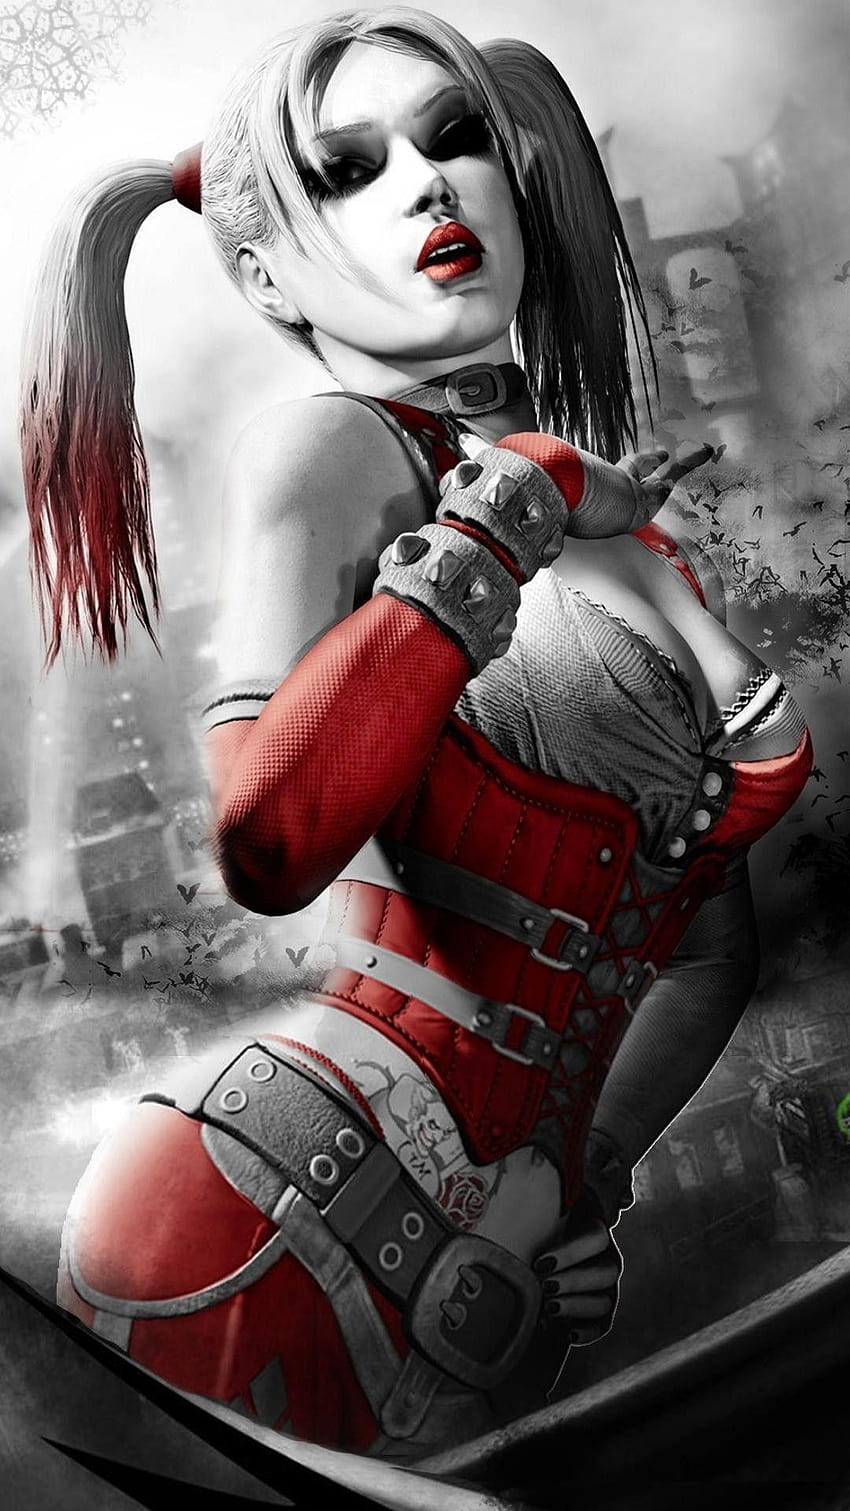 Pin on Android, harley quinn and batman android HD phone wallpaper